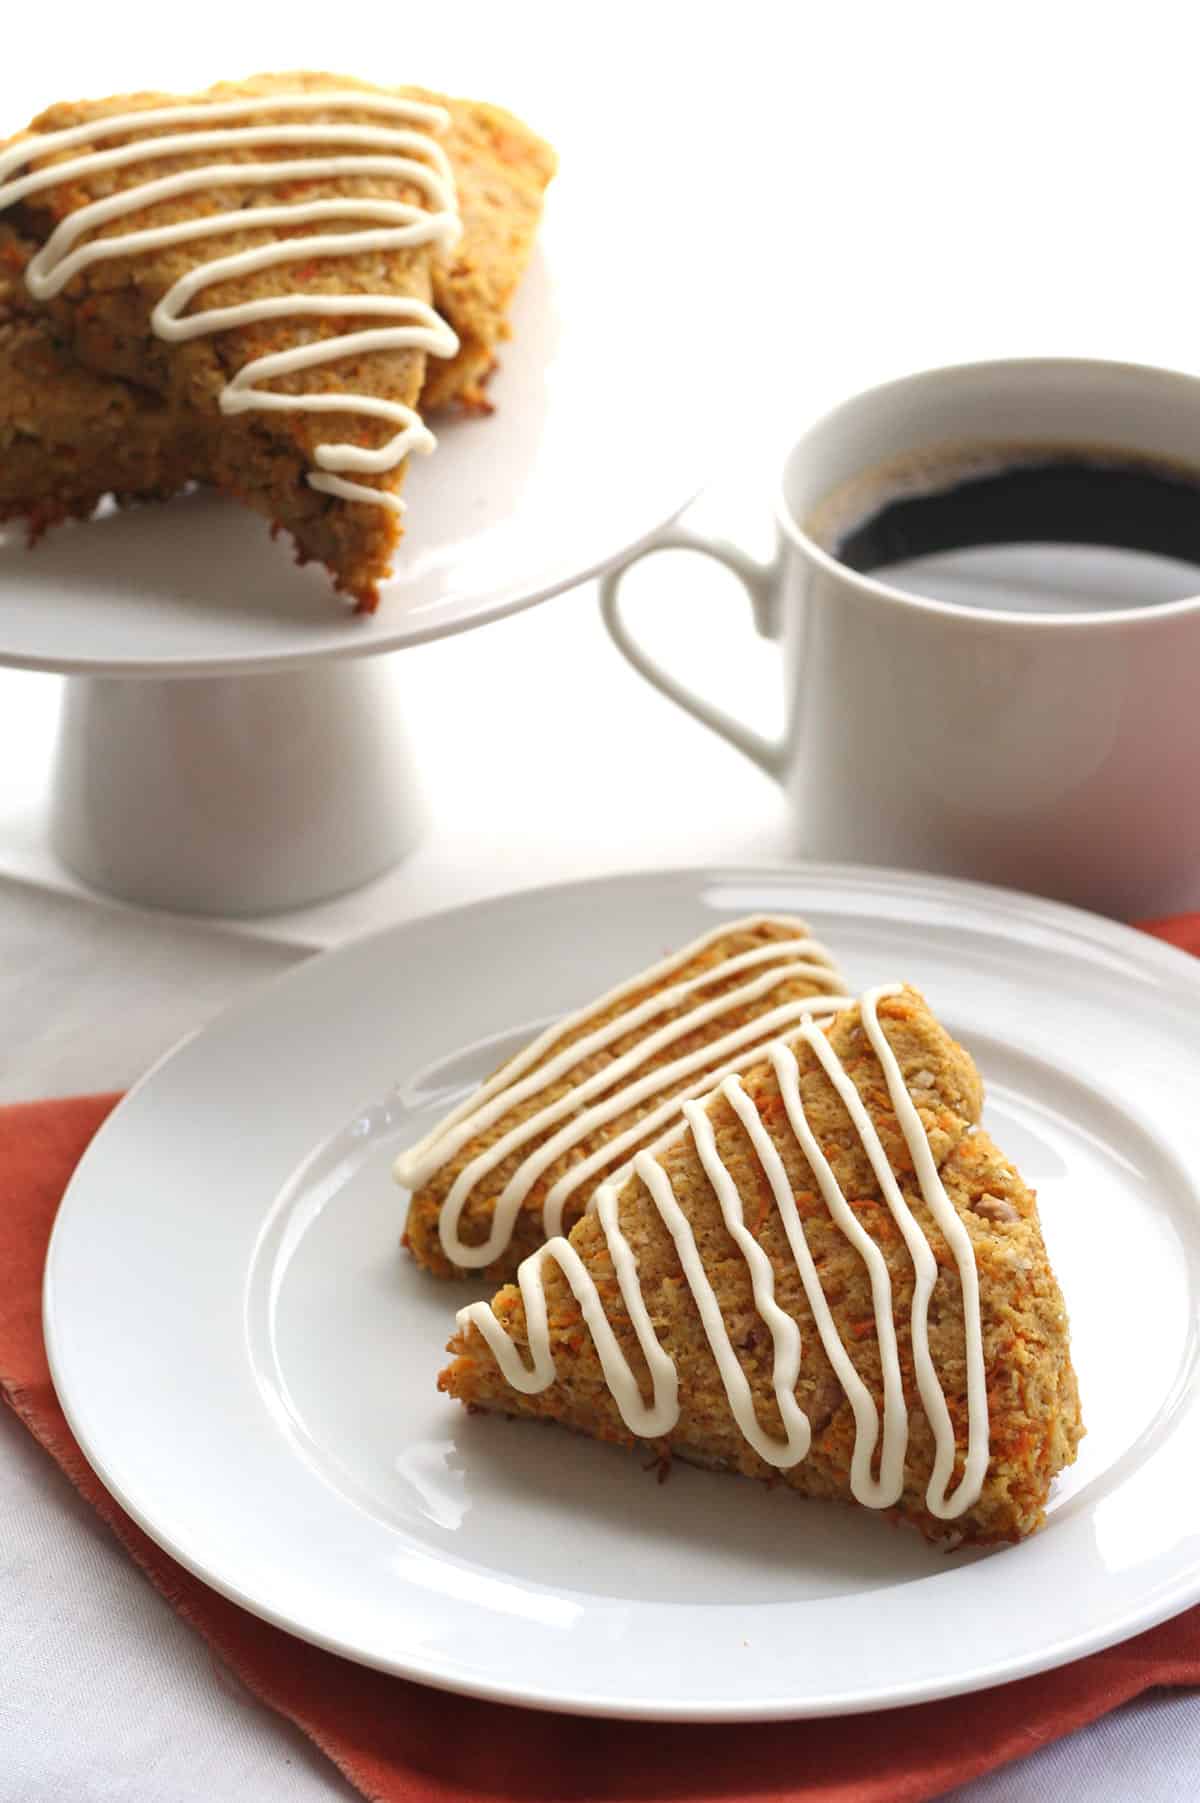 Two keto carrot cake scones on a white plate in front of a cup of coffee.